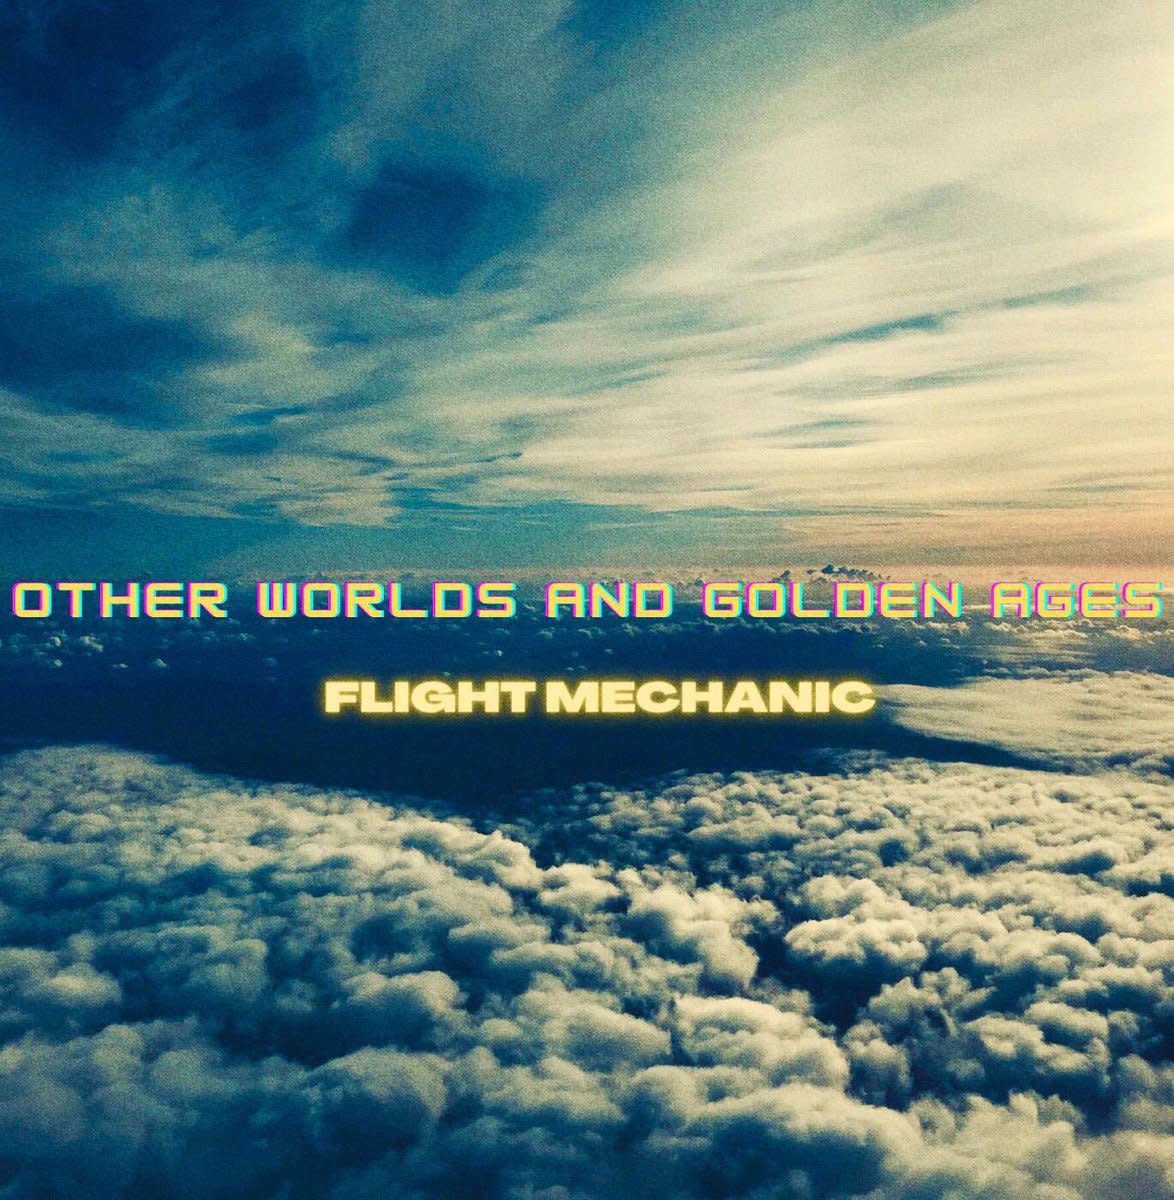 progressive-rock-album-review-other-worlds-and-golden-ages-by-flight-mechanic